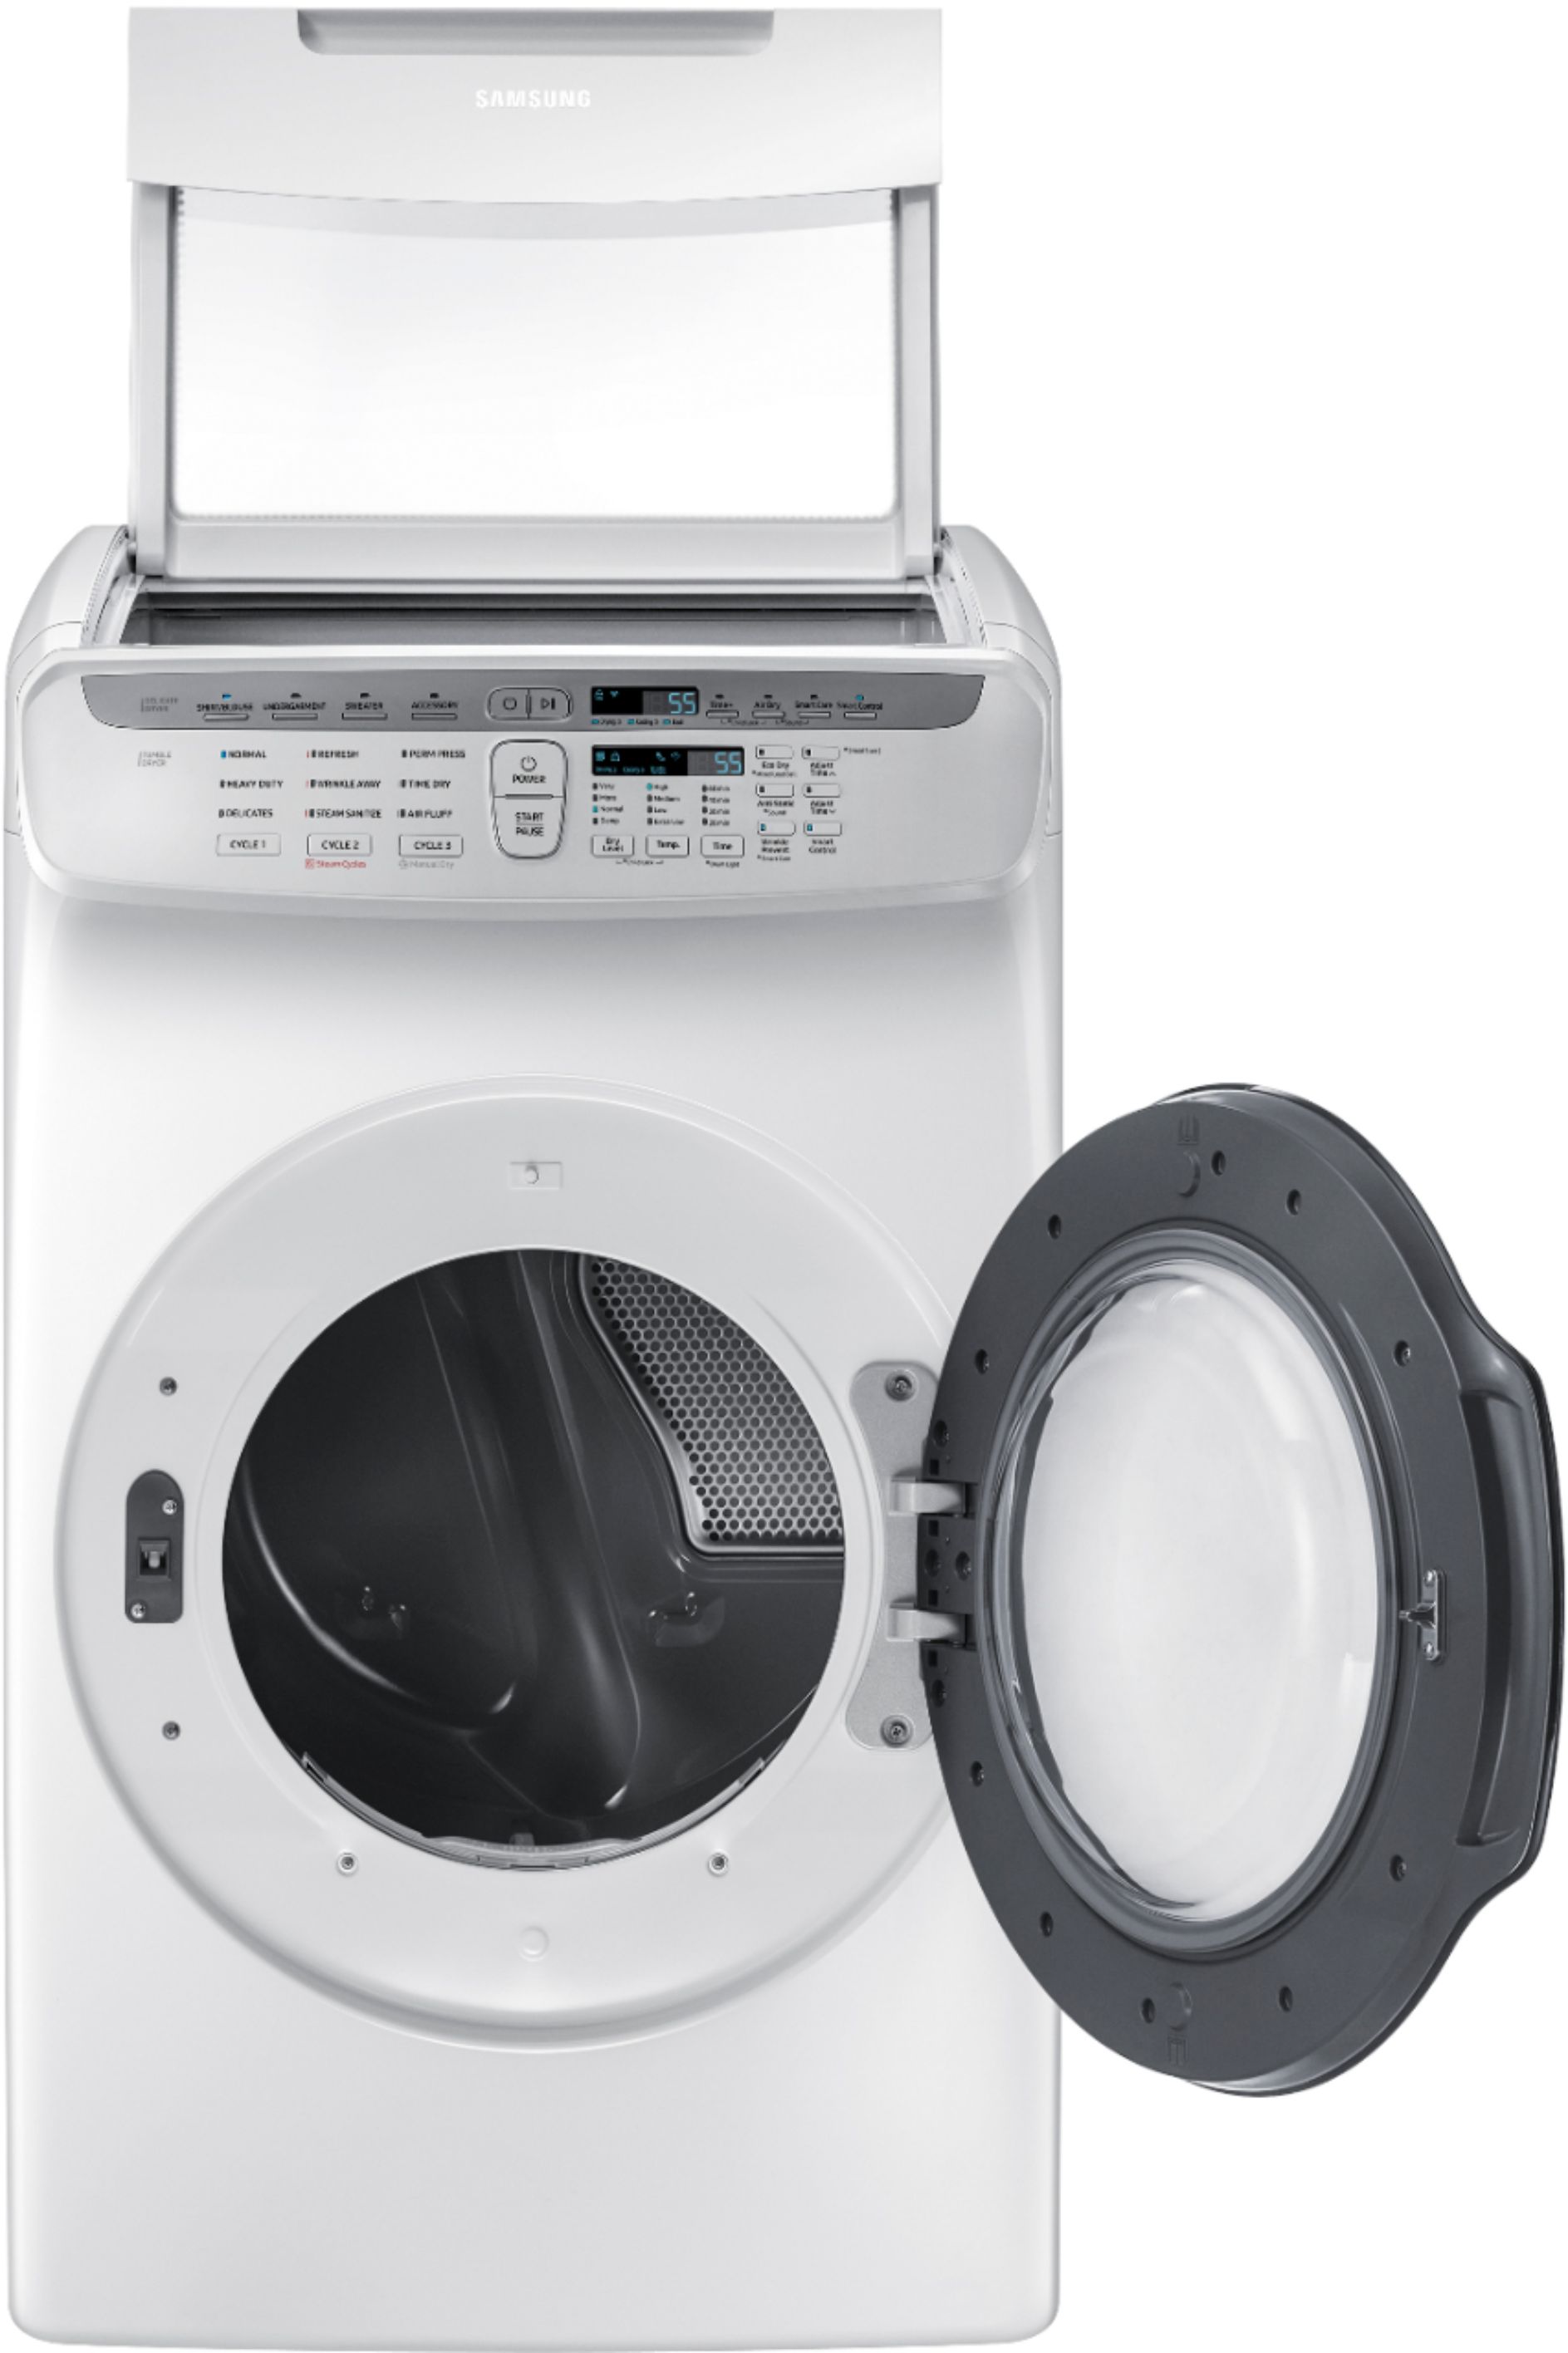 Samsung Electric Dryer Disassembly Dryer Repair Help Youtube